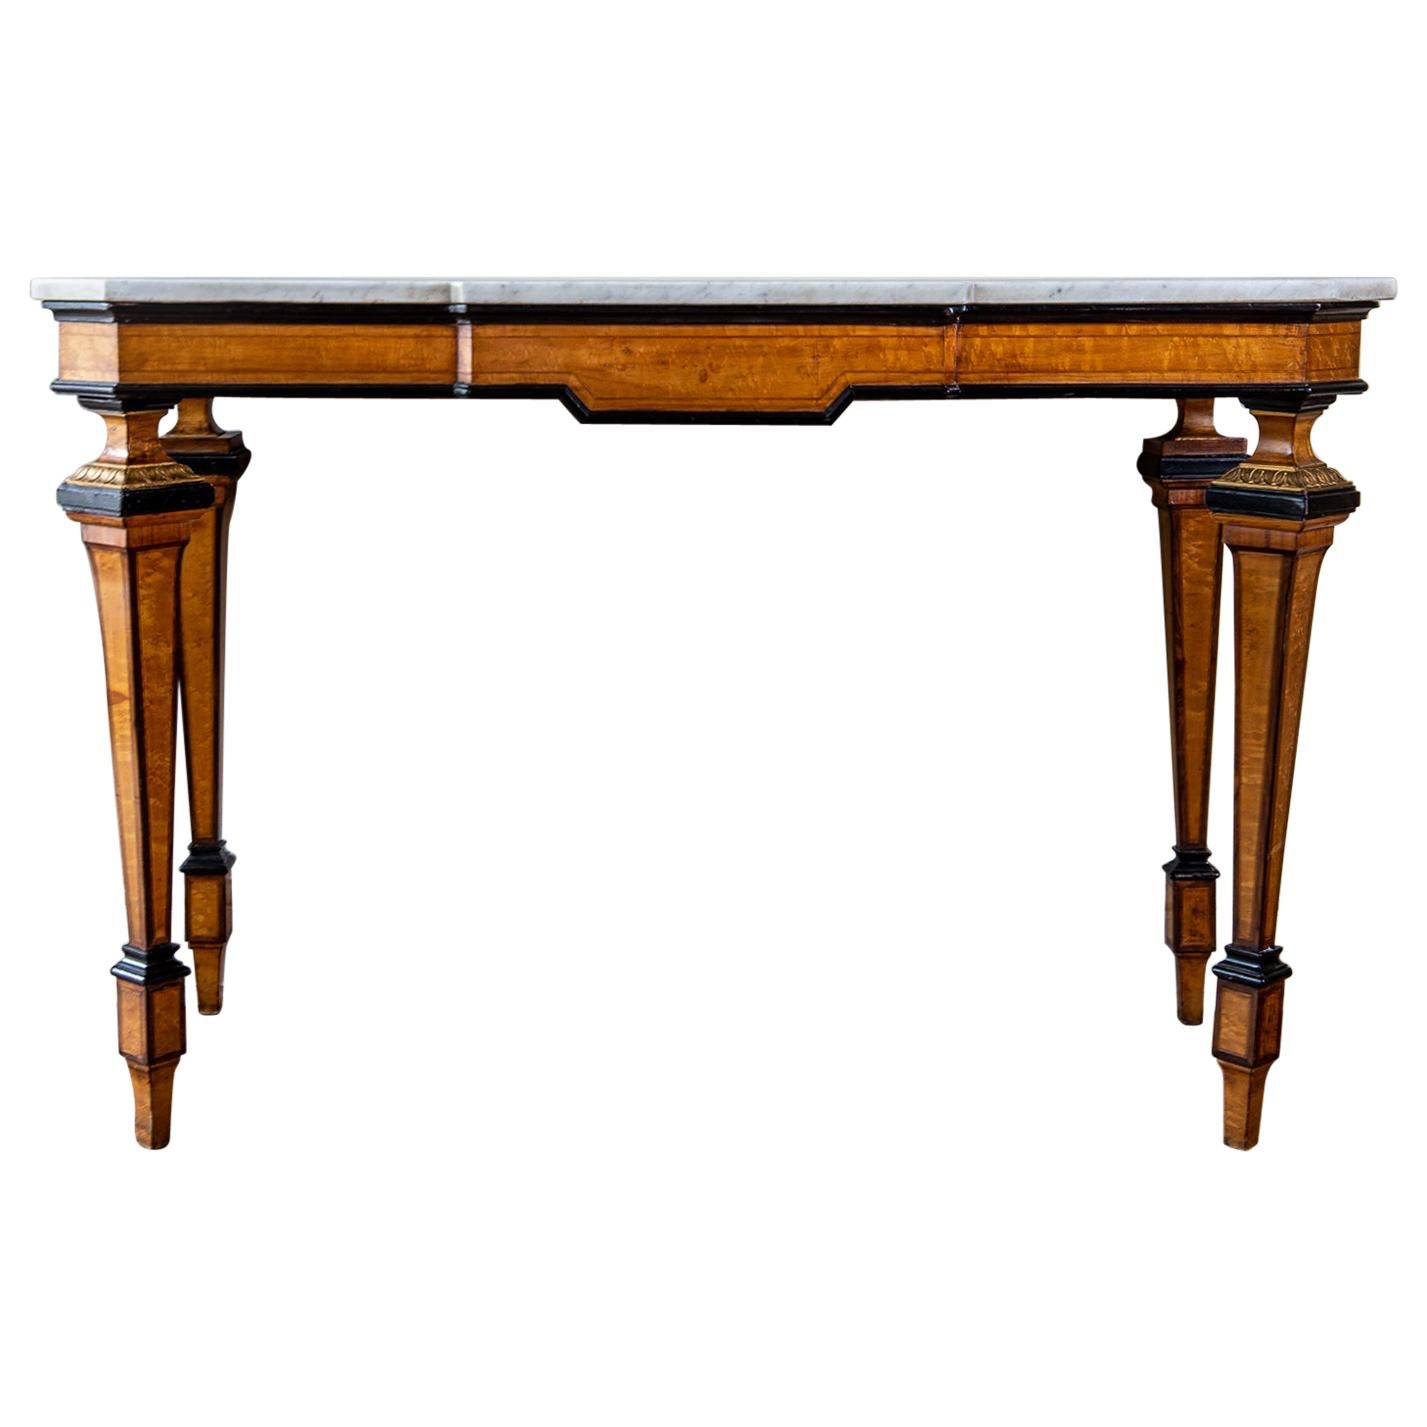 Italian Marble Topped Console Table with Graphic Lines, circa 1850